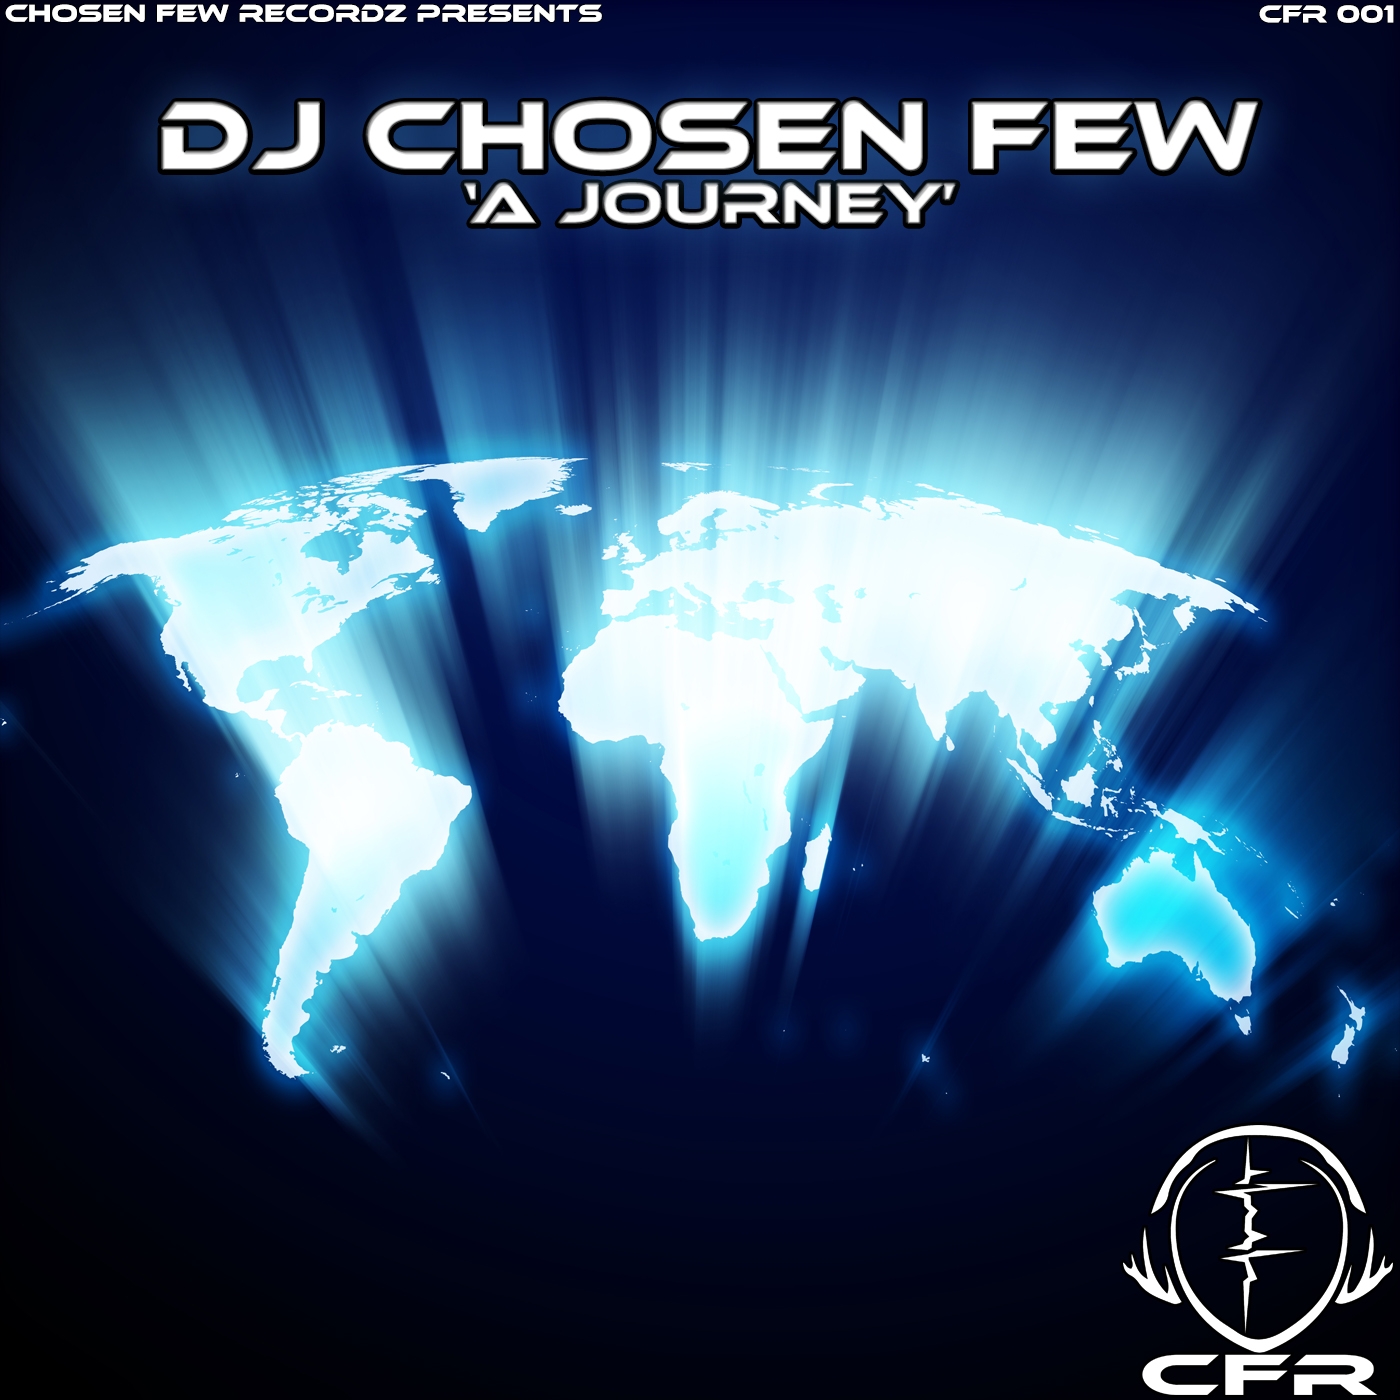 DJ Chosen Few - A Journey EP - MP3 and WAV downloads at Hardtunes